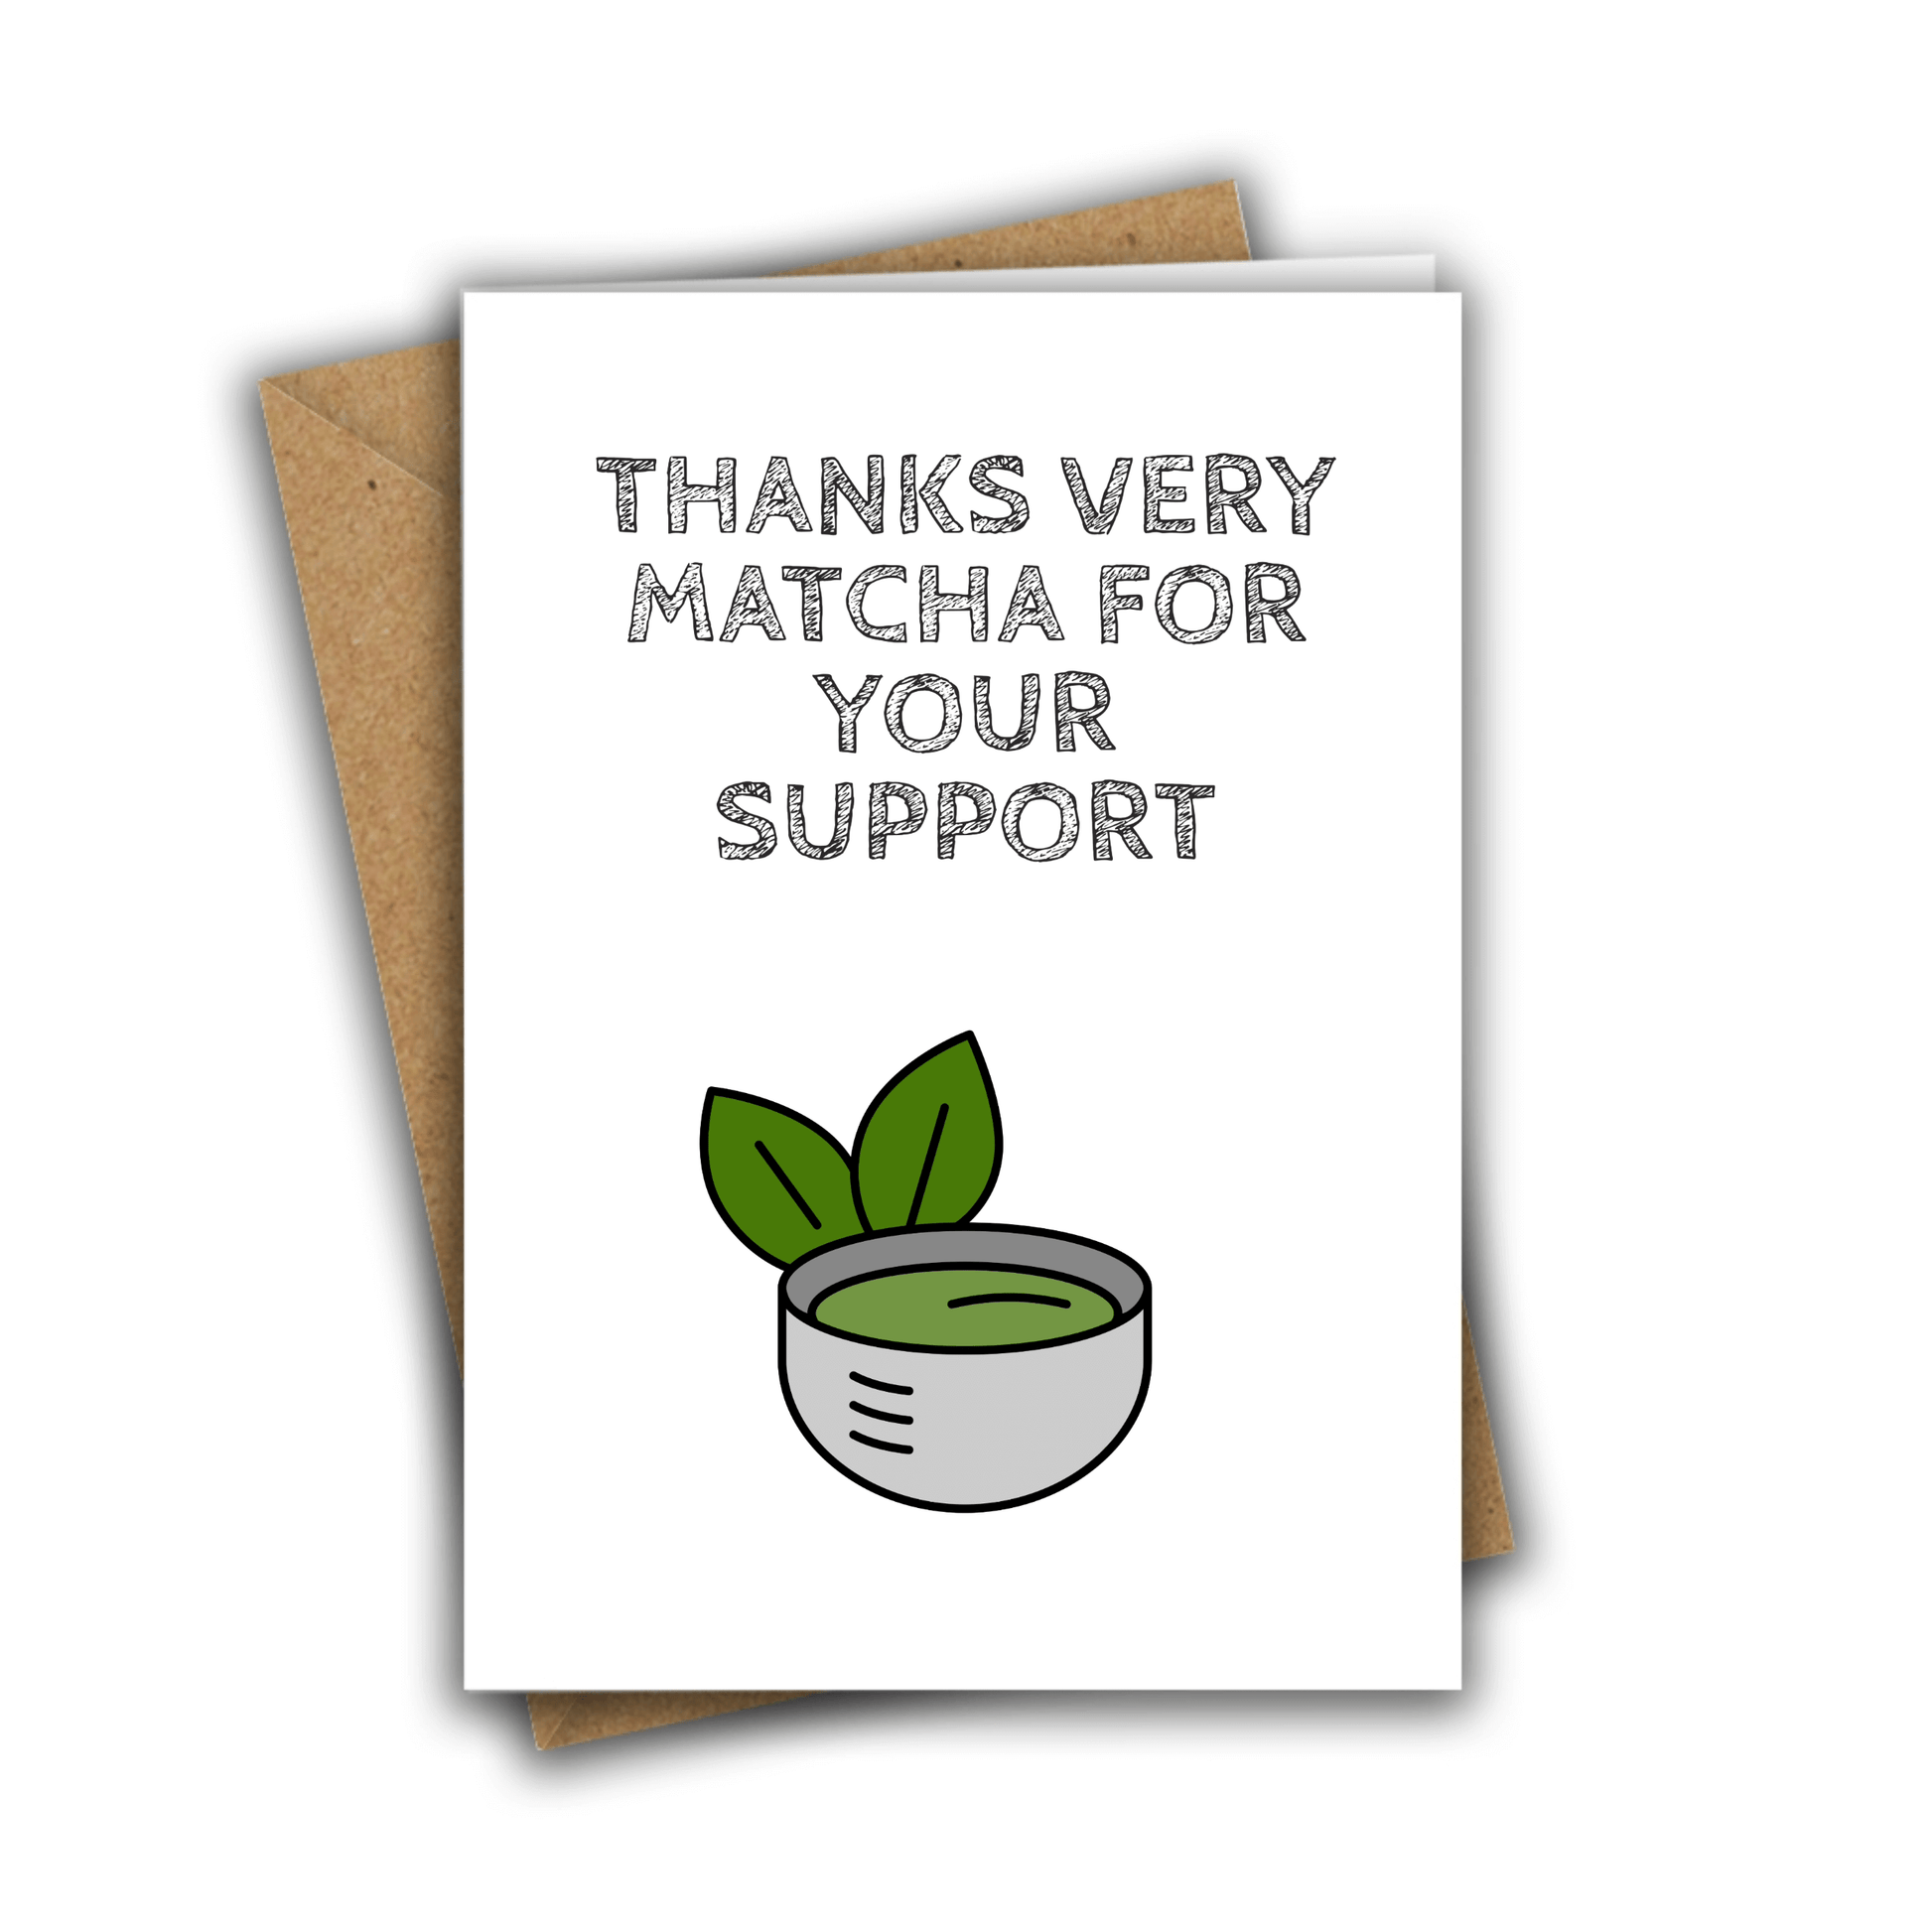 Little Kraken's Thanks Very Matcha for Your Support, Thank You Cards for £3.50 each